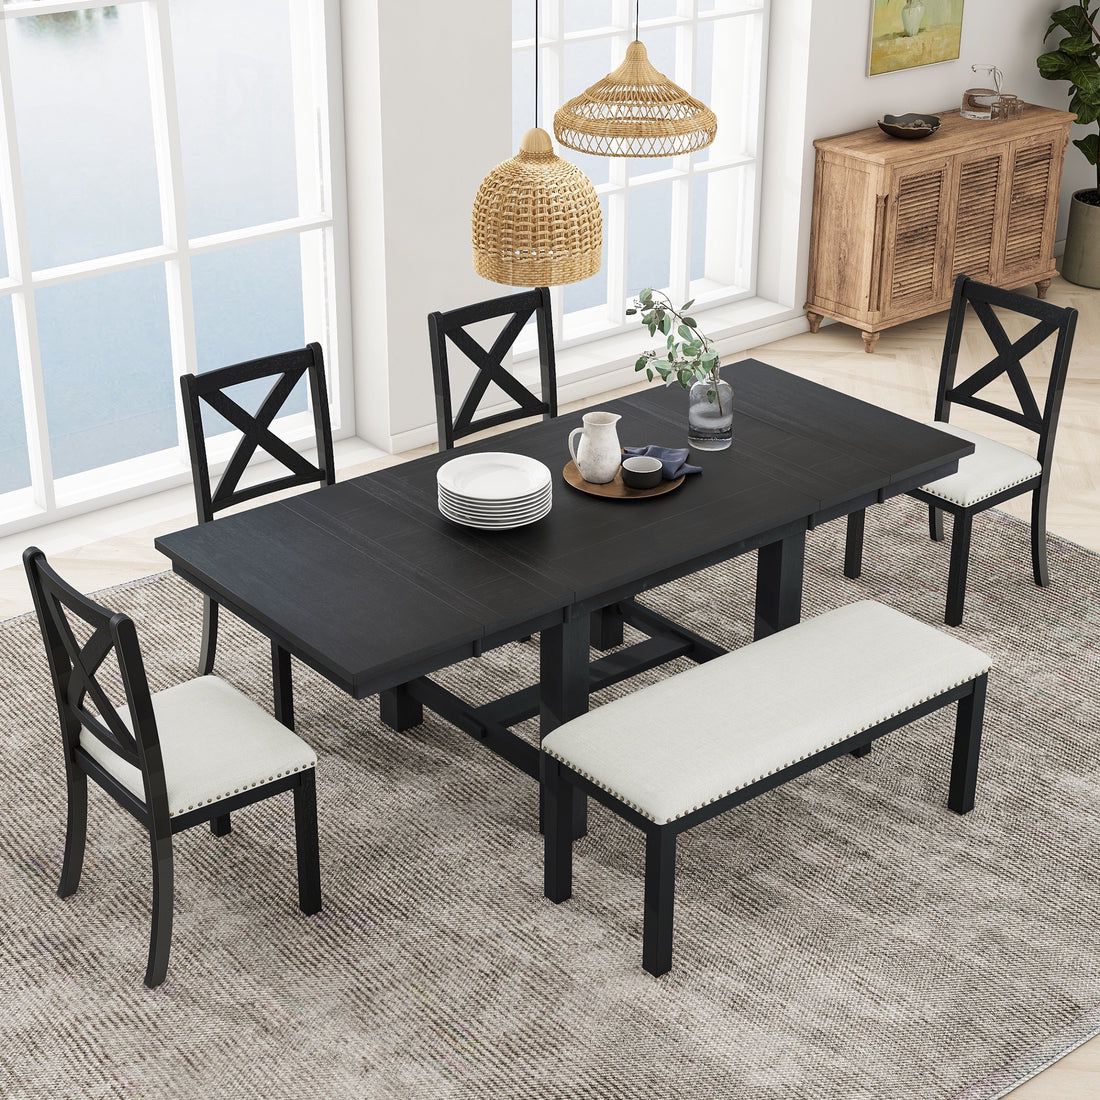 6-Pc Extendable (60” - 81”) Dining Table  / 4-Upholstered Dining Chairs / Bench (Two 11"Removable Leaves)  [NEW]  Retails For $1100